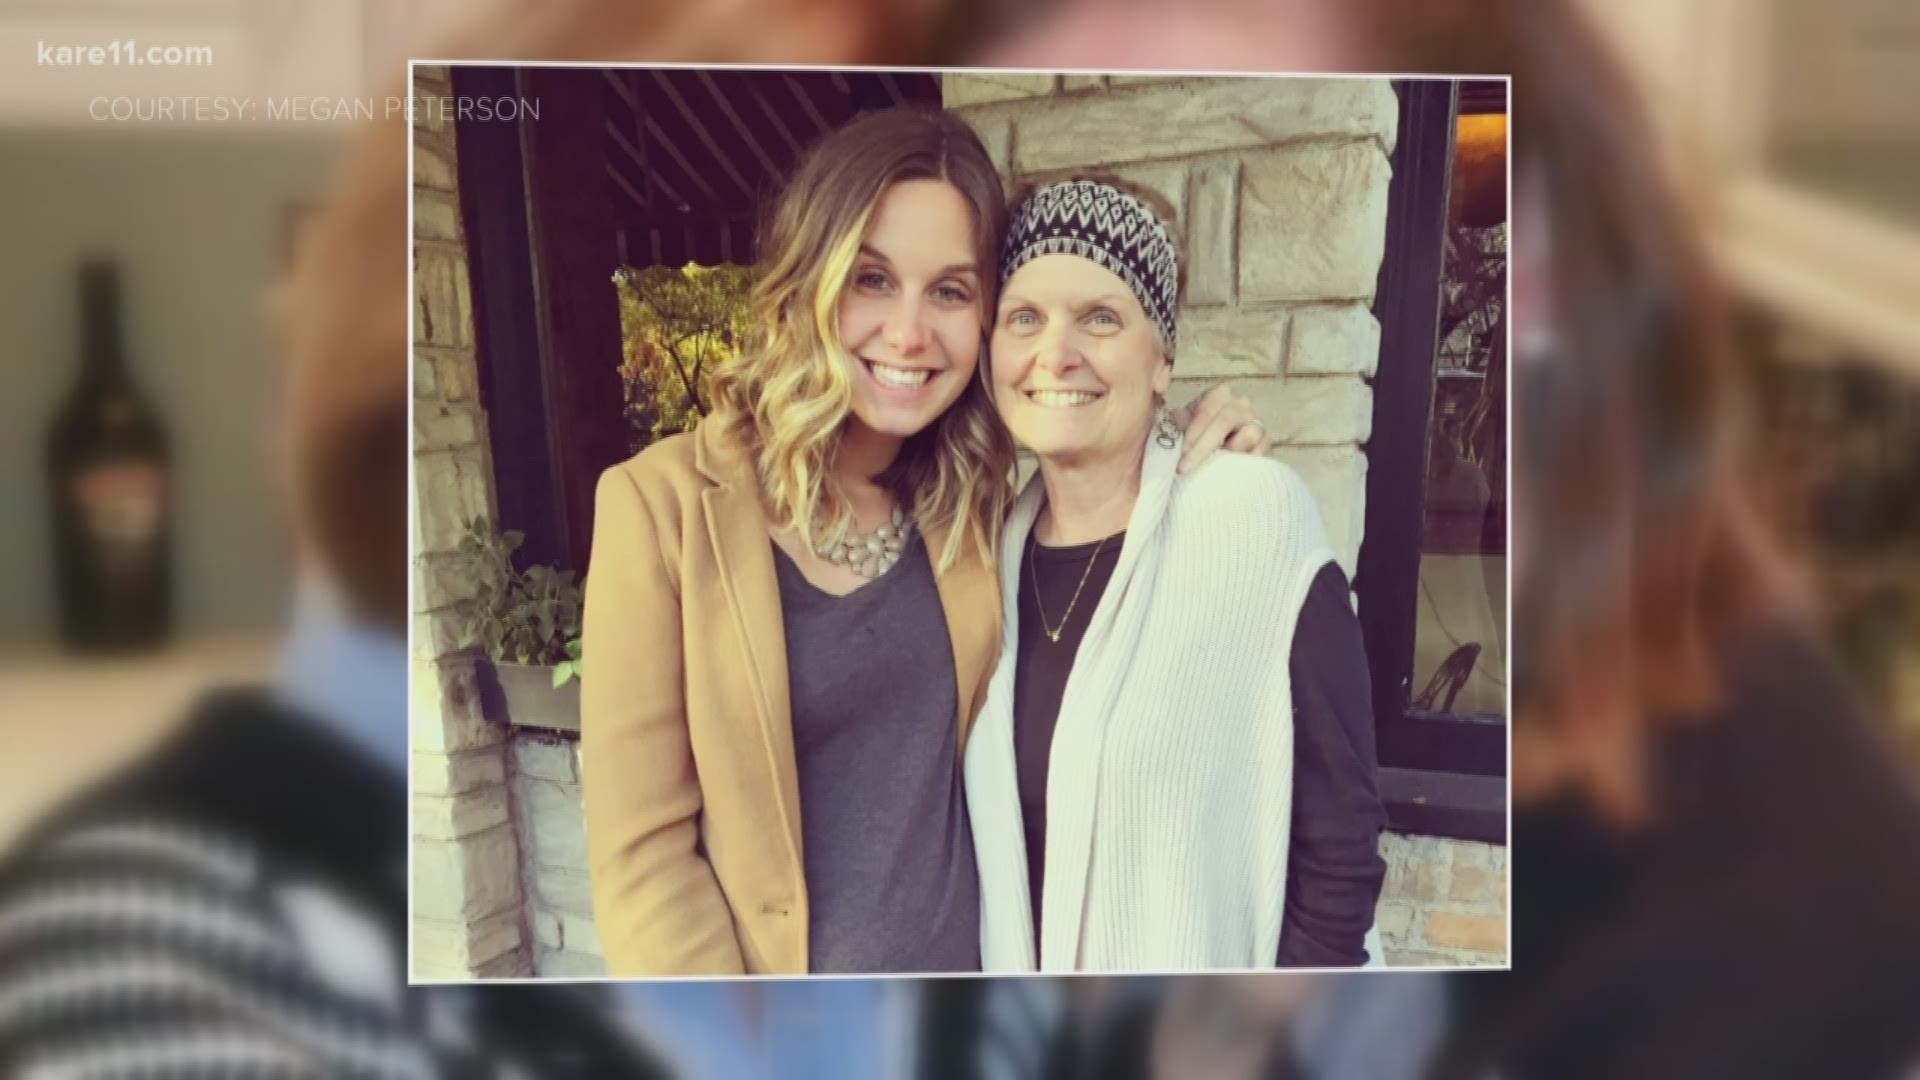 Megan Peterson is honoring her mom's memory by delivering baskets to cancer patients. https://kare11.tv/2LLBiEH